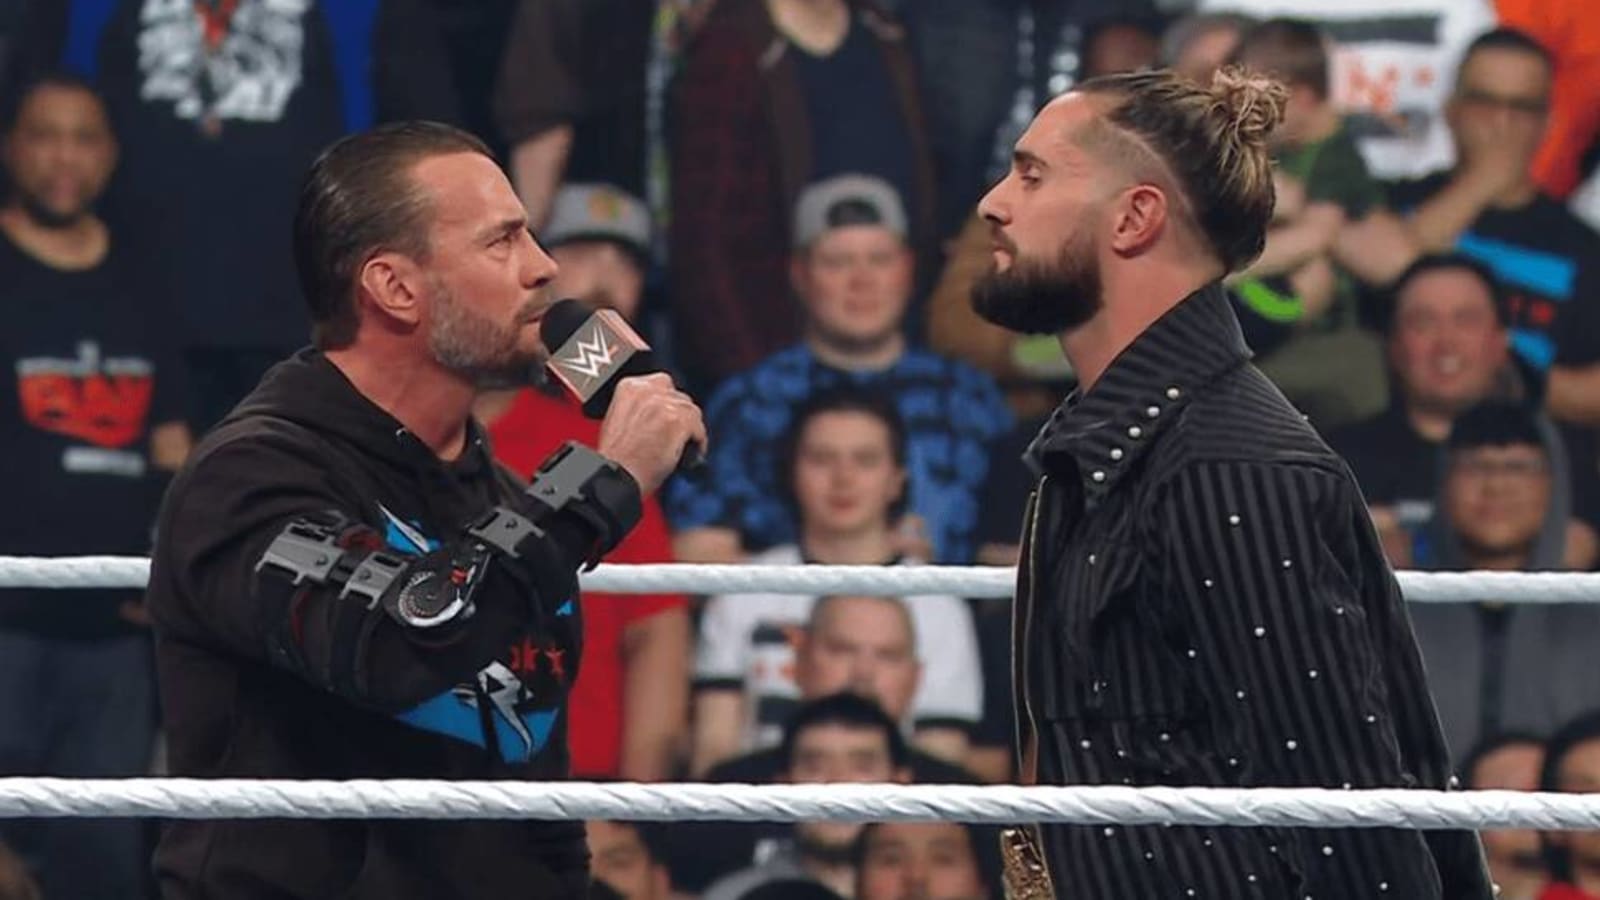 Watch: Is There New Evidence That The Beef Between CM Punk And Seth Rollins Has Ended?